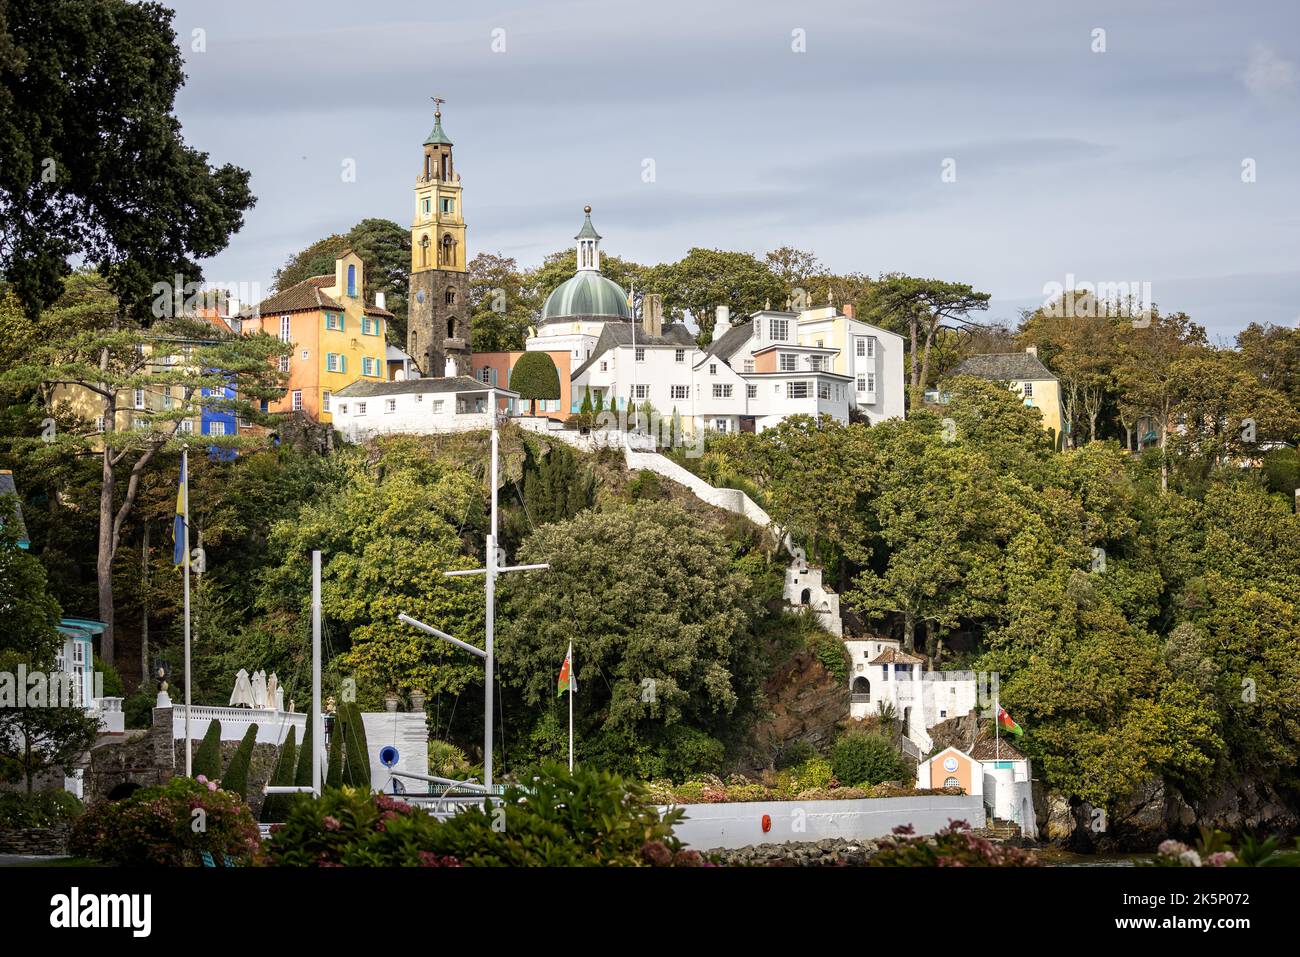 Portmeirion - Italianate style tourist village designed by Sir Clough Williams-Ellis, in Gwynedd, North Wales on 3 October 2022 Stock Photo